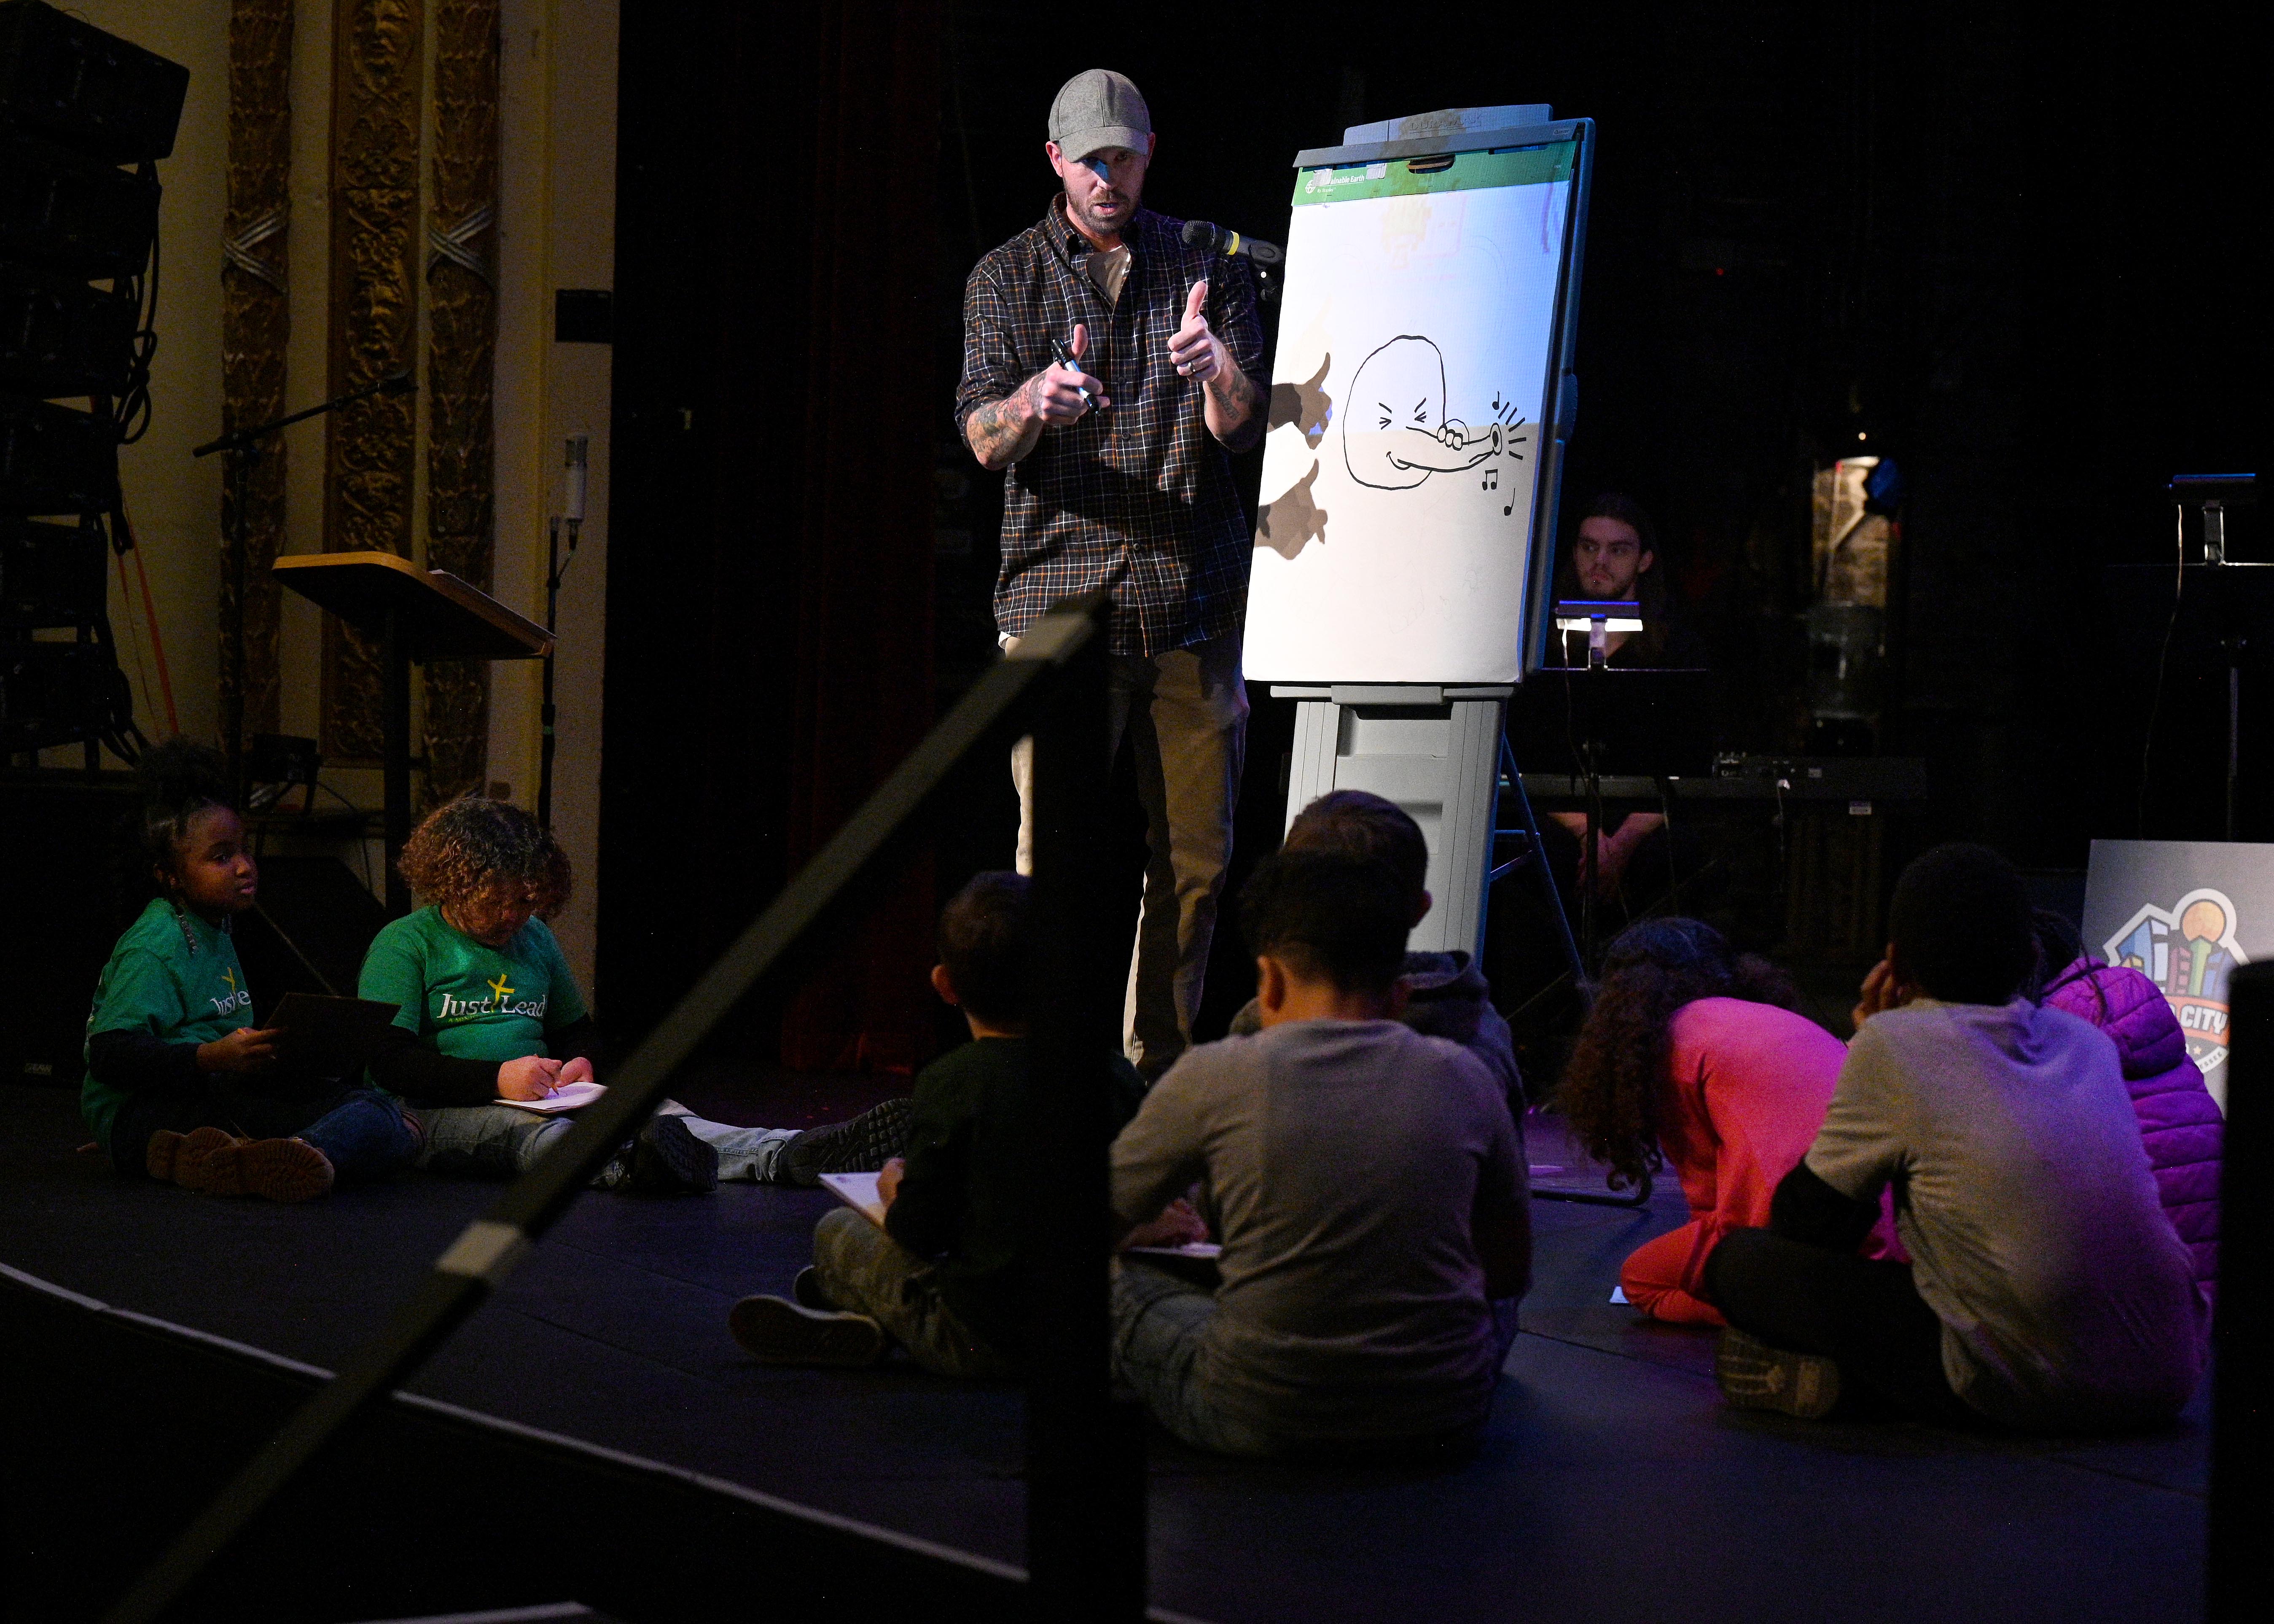 illustrator Daniel Wiseman stands at an easel on stage; a group of young children watch, seated